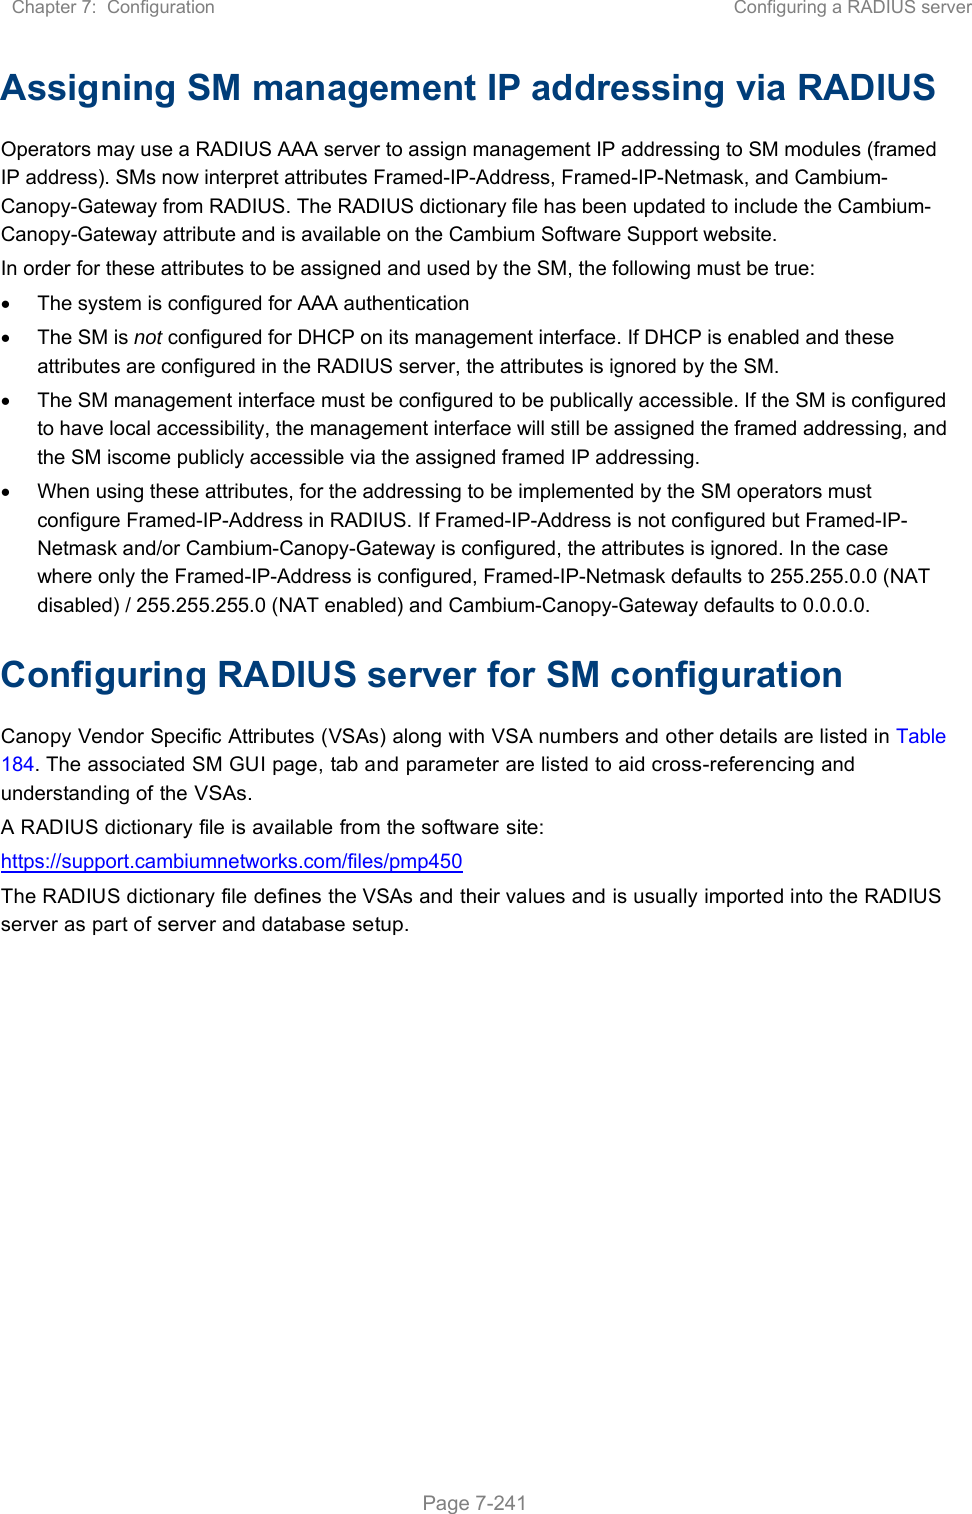 Chapter 7:  Configuration  Configuring a RADIUS server   Page 7-241 Assigning SM management IP addressing via RADIUS Operators may use a RADIUS AAA server to assign management IP addressing to SM modules (framed IP address). SMs now interpret attributes Framed-IP-Address, Framed-IP-Netmask, and Cambium-Canopy-Gateway from RADIUS. The RADIUS dictionary file has been updated to include the Cambium-Canopy-Gateway attribute and is available on the Cambium Software Support website. In order for these attributes to be assigned and used by the SM, the following must be true:   The system is configured for AAA authentication   The SM is not configured for DHCP on its management interface. If DHCP is enabled and these attributes are configured in the RADIUS server, the attributes is ignored by the SM.   The SM management interface must be configured to be publically accessible. If the SM is configured to have local accessibility, the management interface will still be assigned the framed addressing, and the SM iscome publicly accessible via the assigned framed IP addressing.   When using these attributes, for the addressing to be implemented by the SM operators must configure Framed-IP-Address in RADIUS. If Framed-IP-Address is not configured but Framed-IP-Netmask and/or Cambium-Canopy-Gateway is configured, the attributes is ignored. In the case where only the Framed-IP-Address is configured, Framed-IP-Netmask defaults to 255.255.0.0 (NAT disabled) / 255.255.255.0 (NAT enabled) and Cambium-Canopy-Gateway defaults to 0.0.0.0. Configuring RADIUS server for SM configuration Canopy Vendor Specific Attributes (VSAs) along with VSA numbers and other details are listed in Table 184. The associated SM GUI page, tab and parameter are listed to aid cross-referencing and understanding of the VSAs. A RADIUS dictionary file is available from the software site:  https://support.cambiumnetworks.com/files/pmp450 The RADIUS dictionary file defines the VSAs and their values and is usually imported into the RADIUS server as part of server and database setup.  